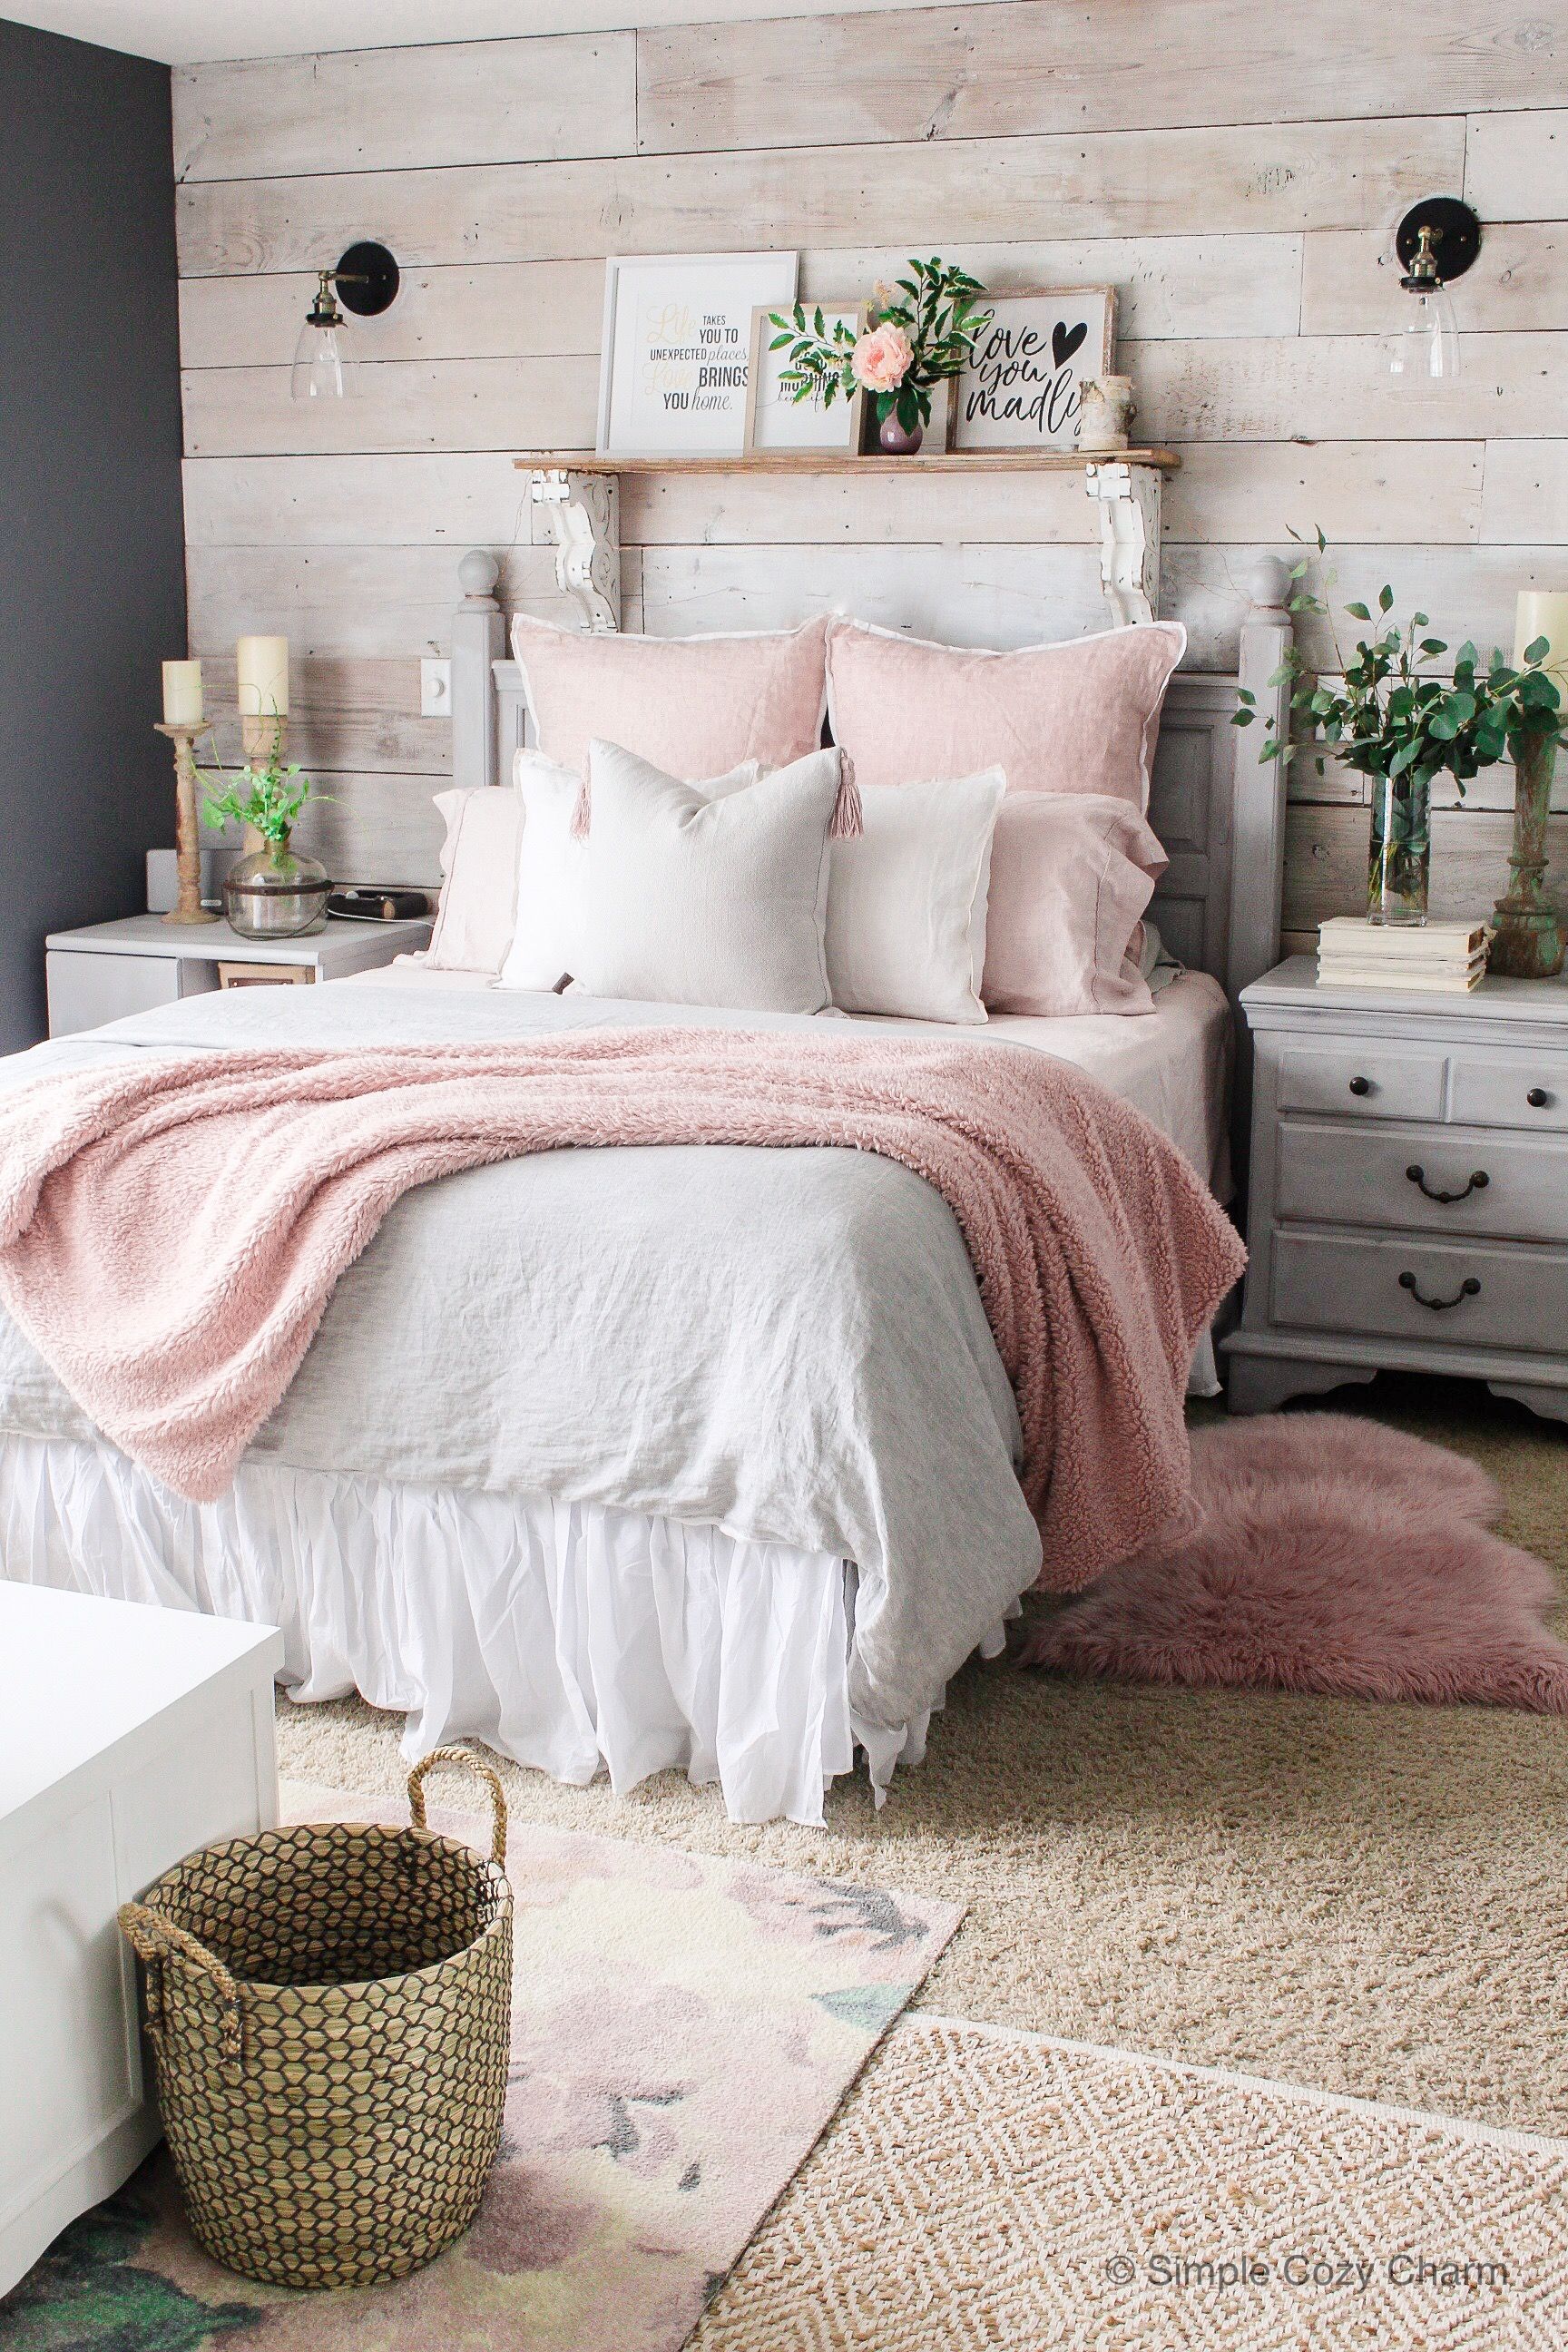 Bedroom Decor Inspiration: Unlock Your Creativity And Transform Your Space